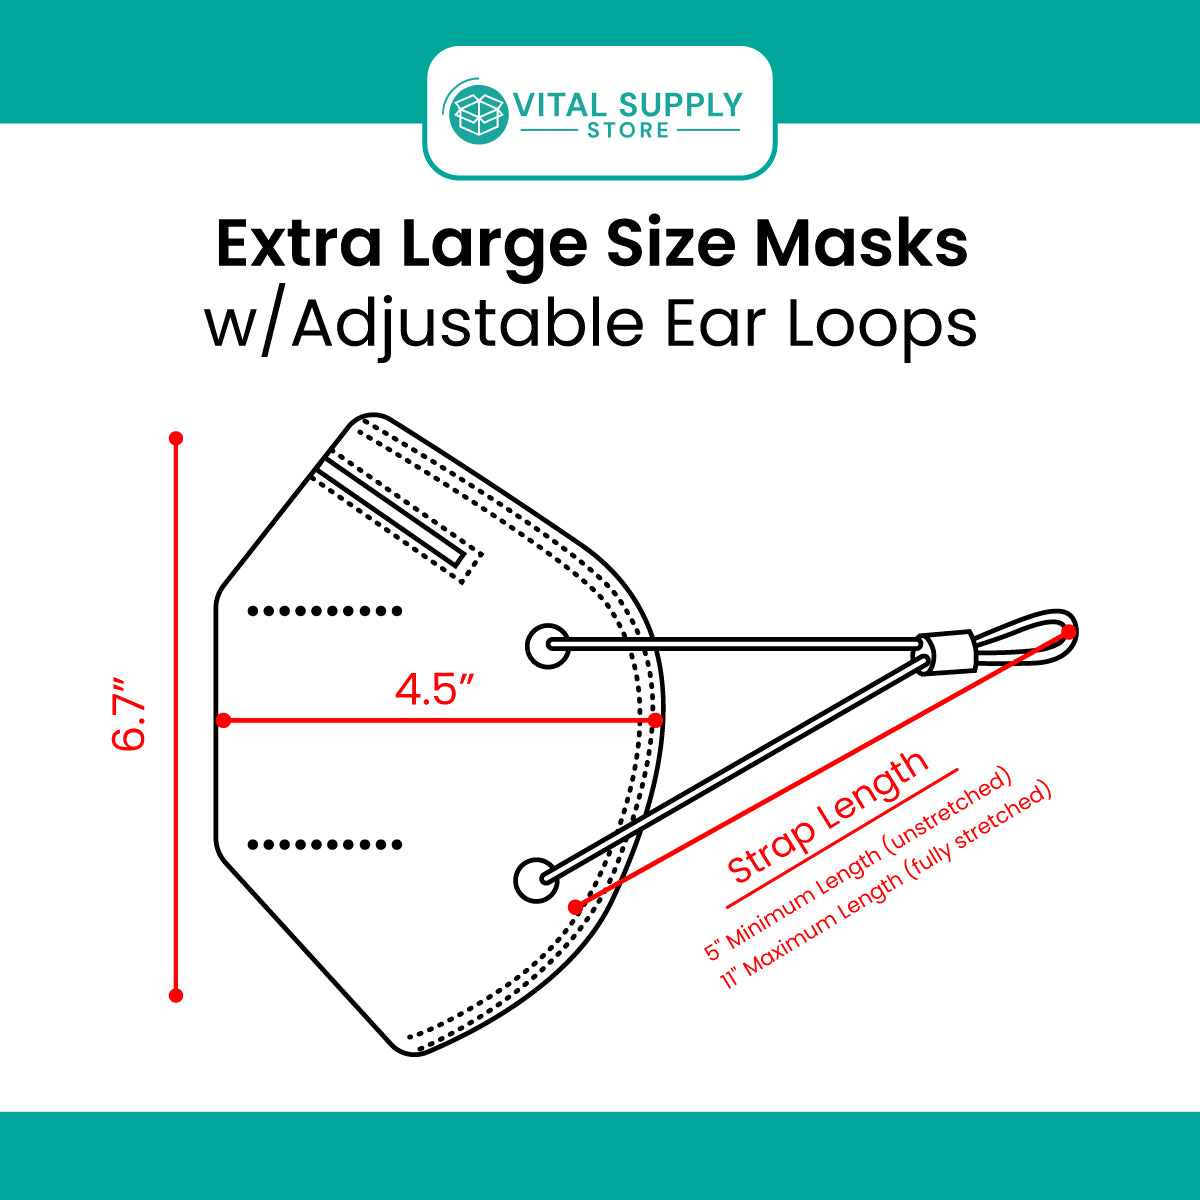 Kn95 Masks In Sizes From Extra Large to Small